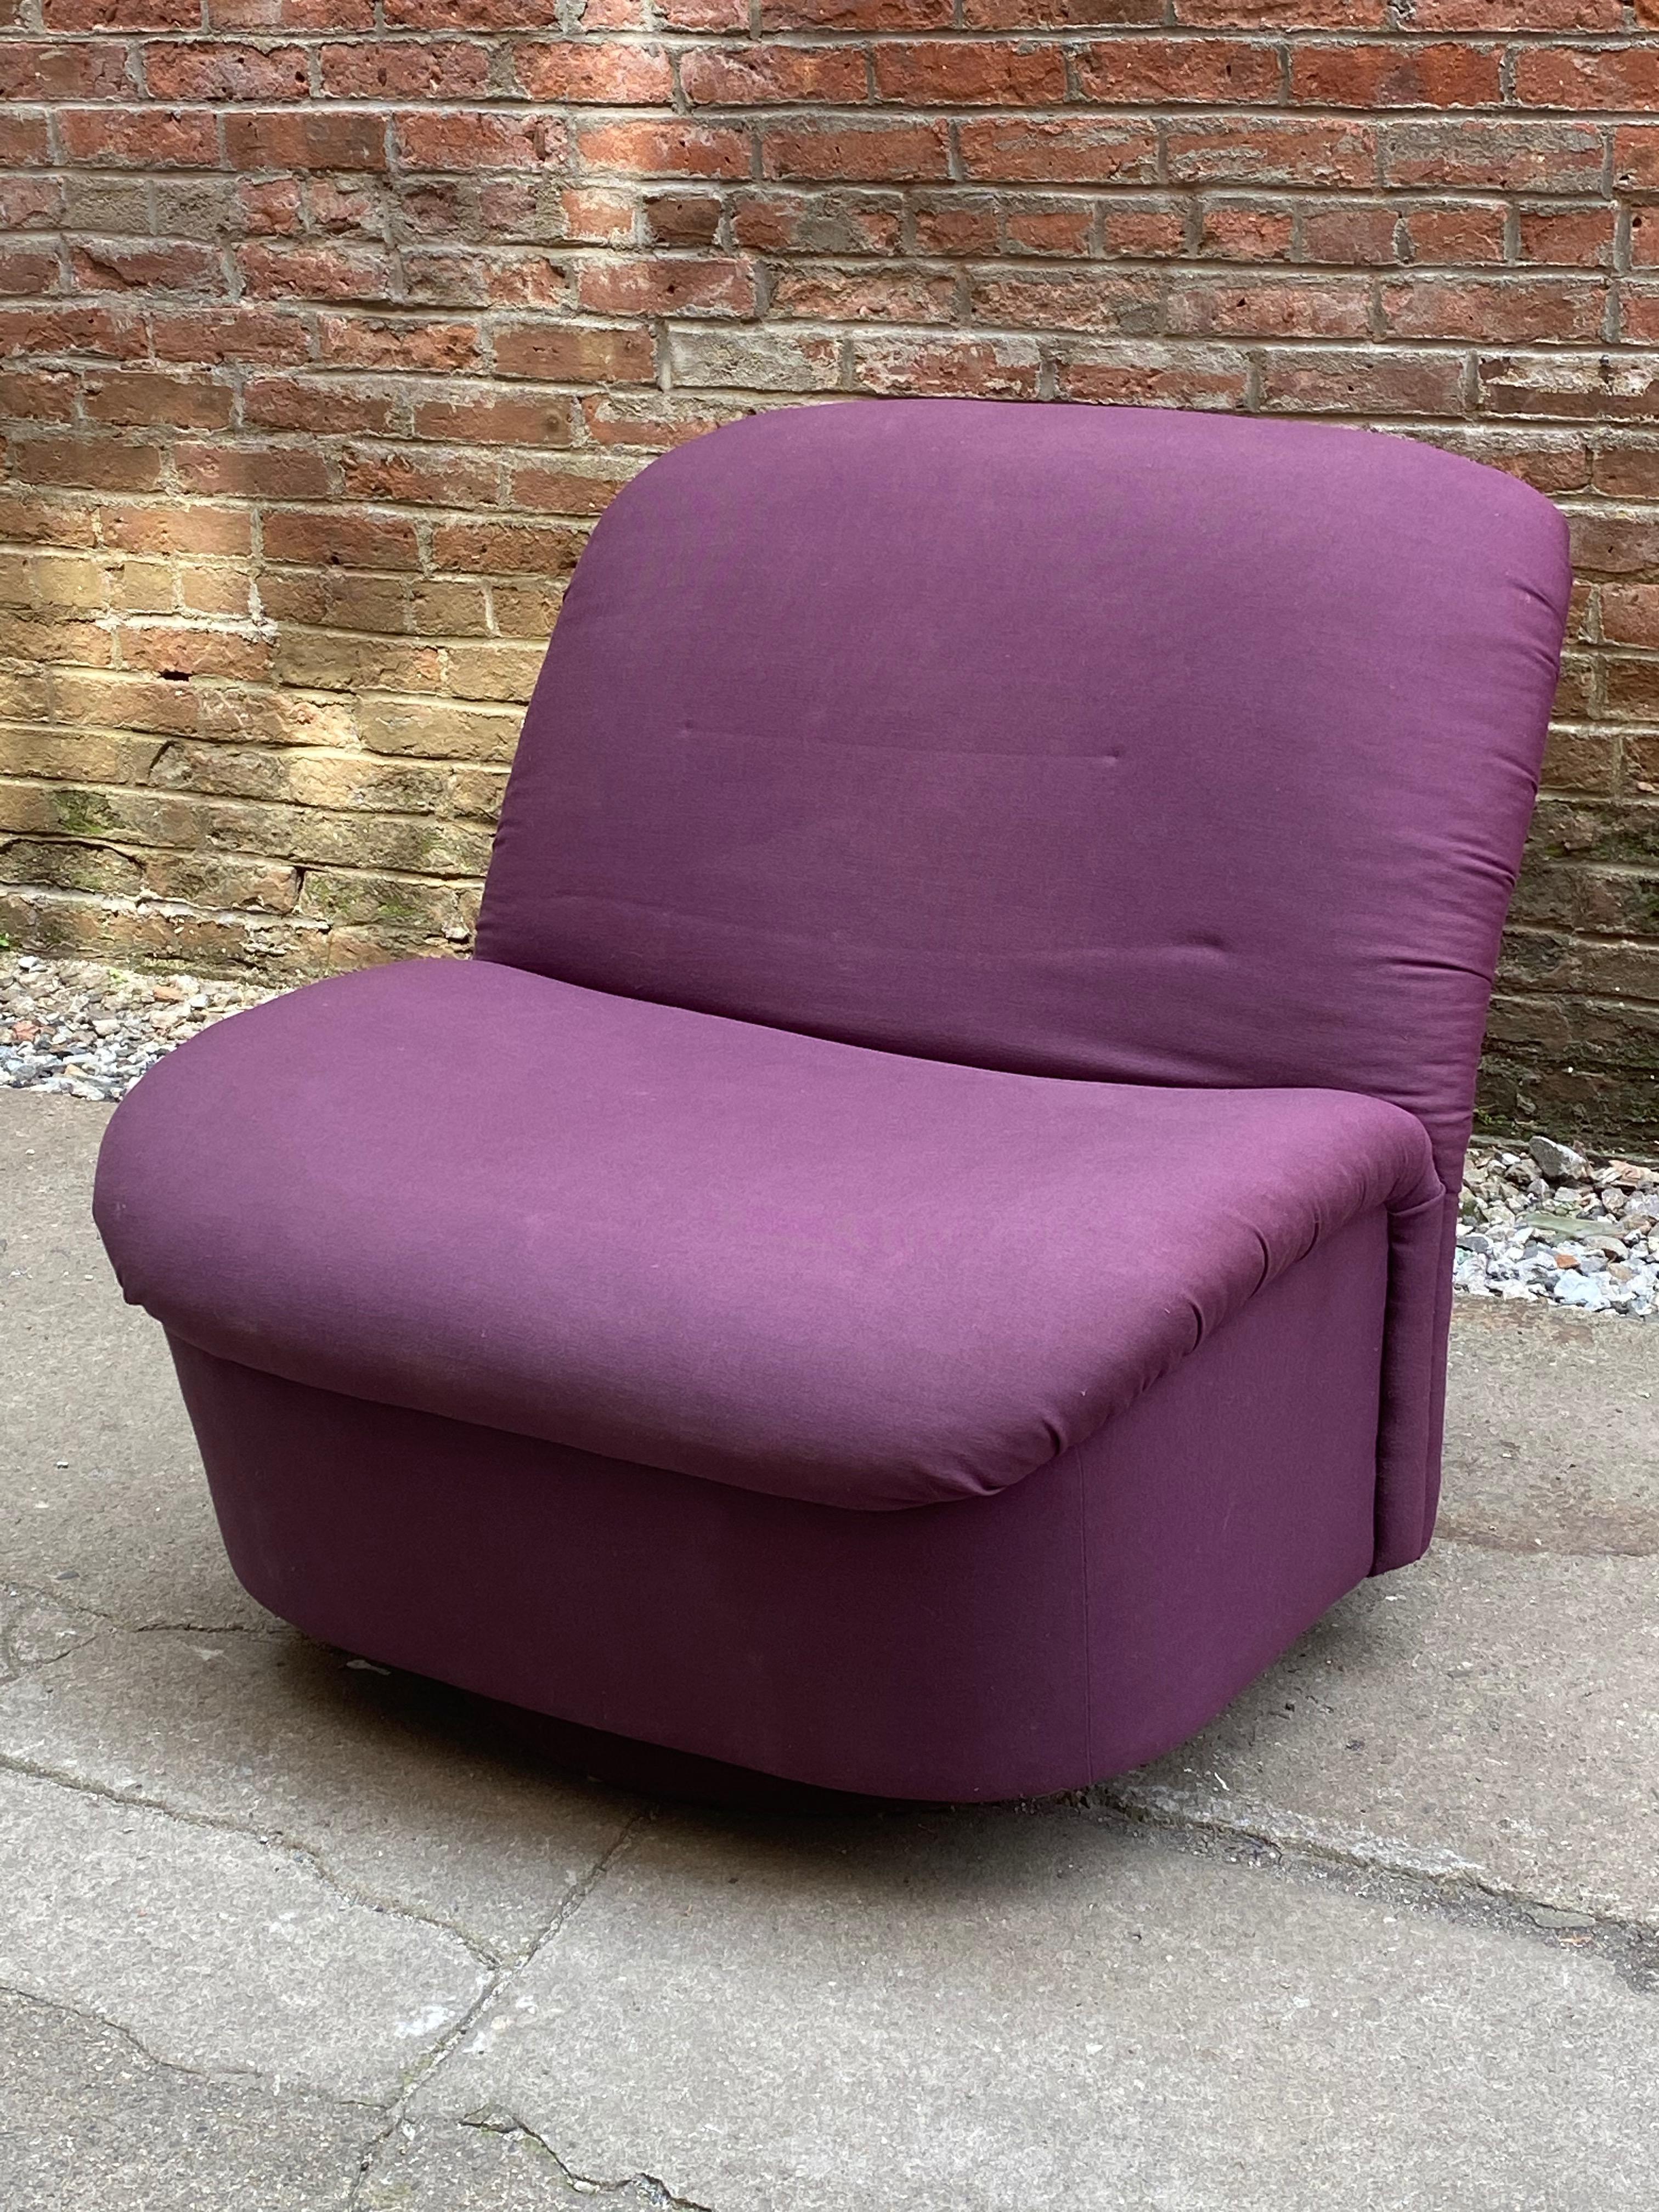 Postmodern directional swivel lounge chair. Signed and labeled, directional, high point, N.C, circa 1988. Maximum comfort aubergine cotton upholstery. Rocks and tilts. Fabric and cushions are in good condition with minor fading due to age and a few